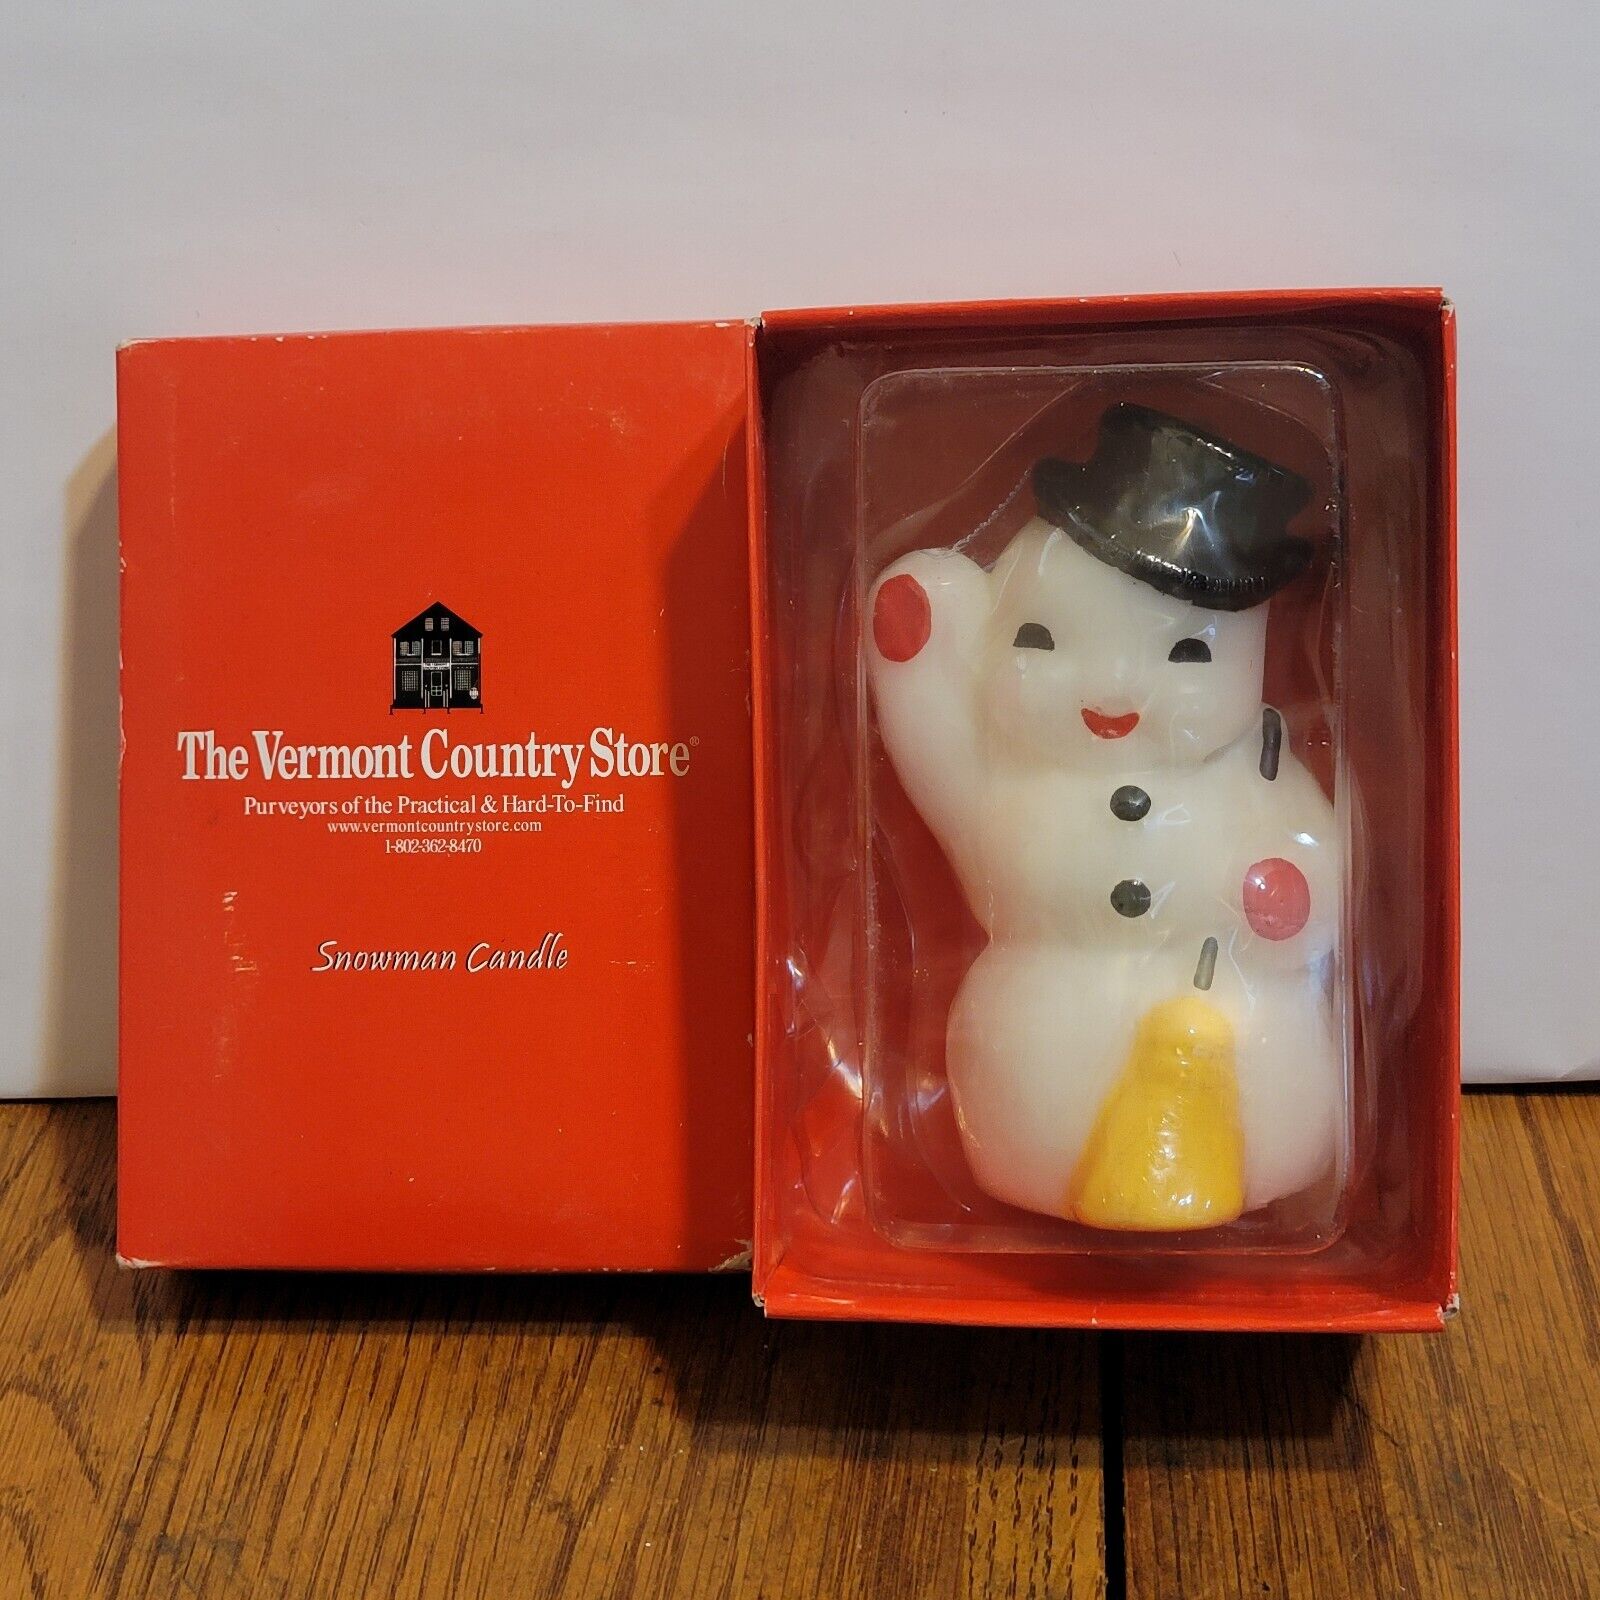 The Vermont Country Store Christmas Snowman candle